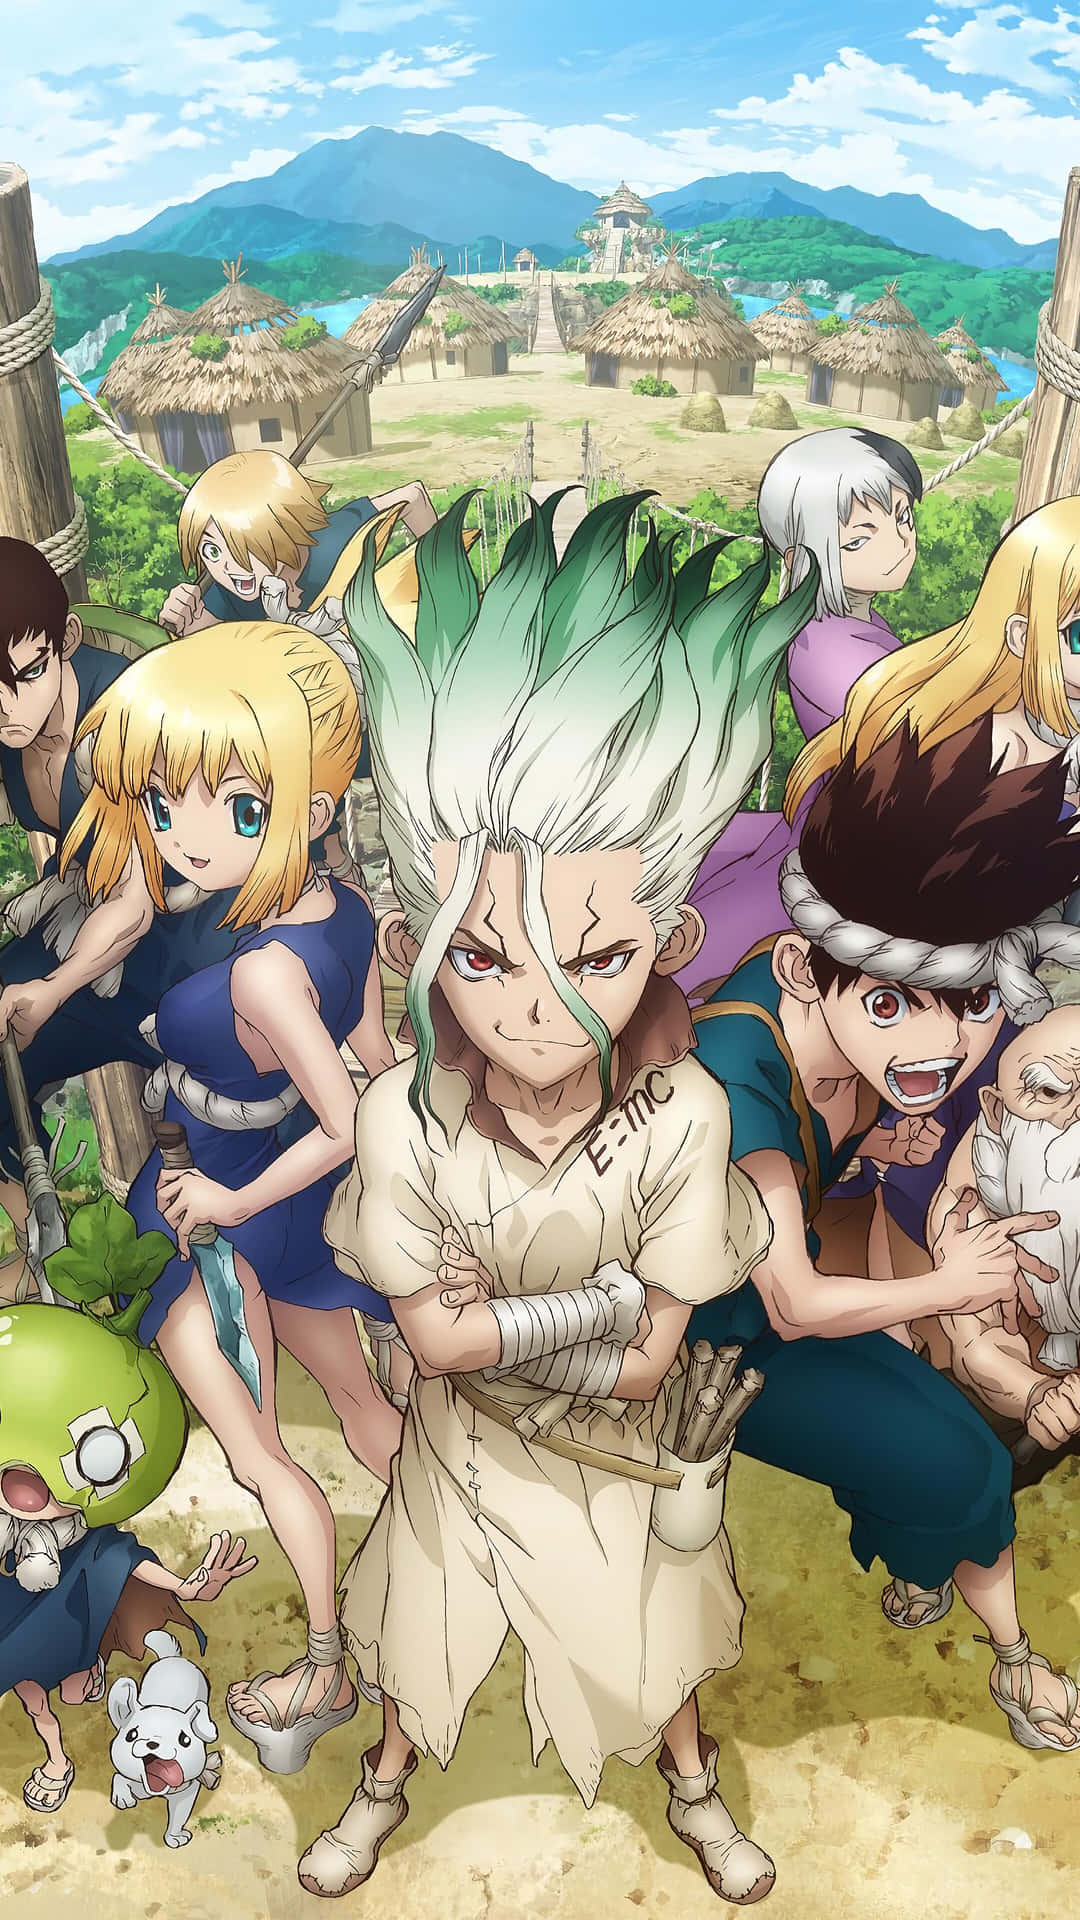 Dive Into The Amazing World of Dr. Stone